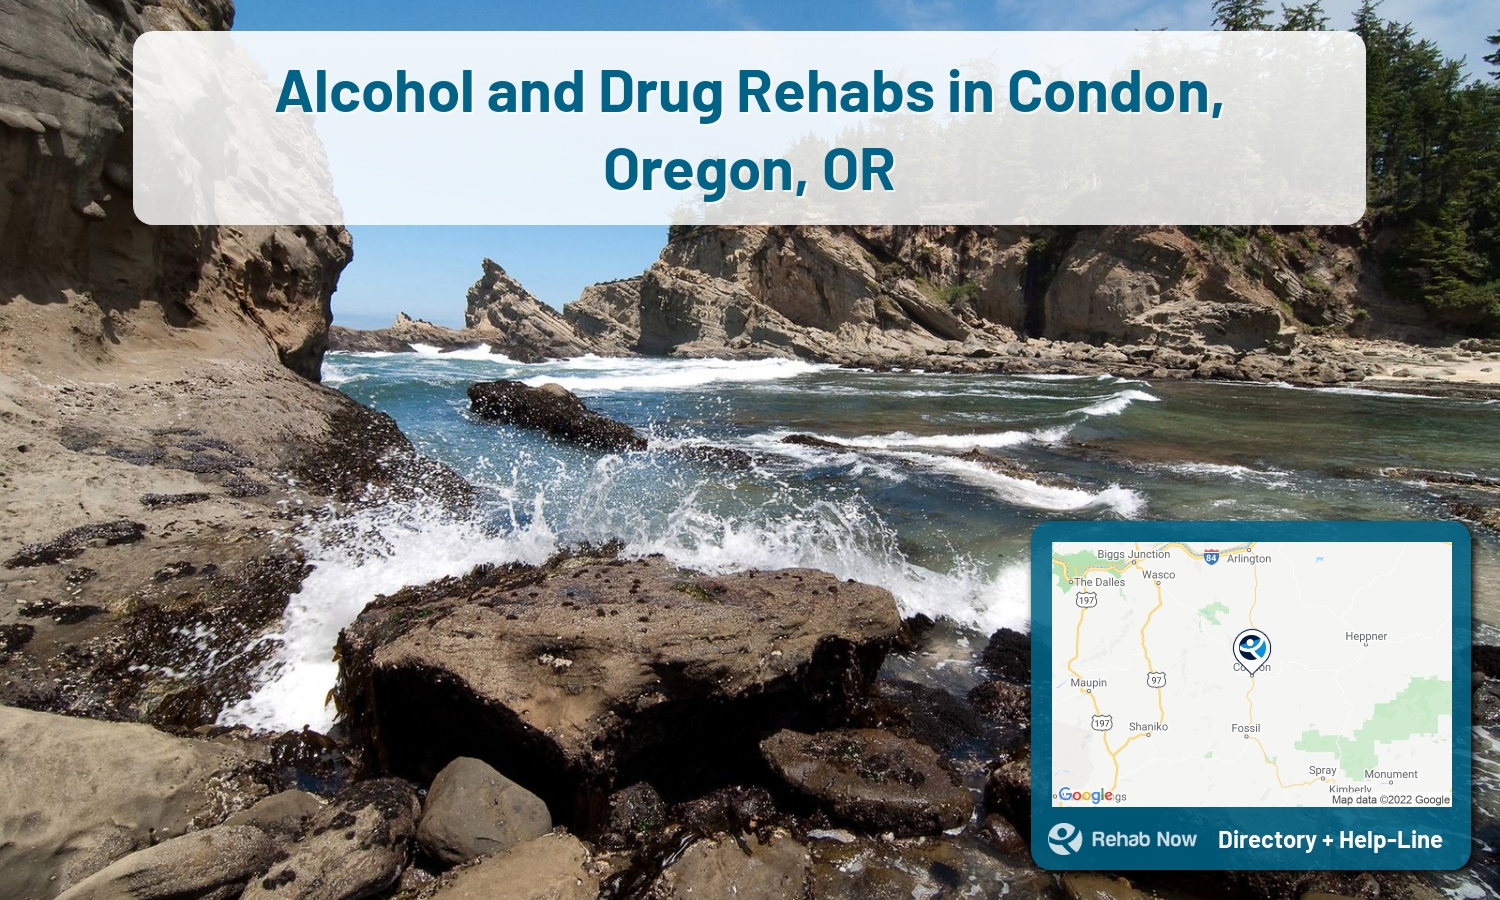 View options, availability, treatment methods, and more, for drug rehab and alcohol treatment in Condon, Oregon